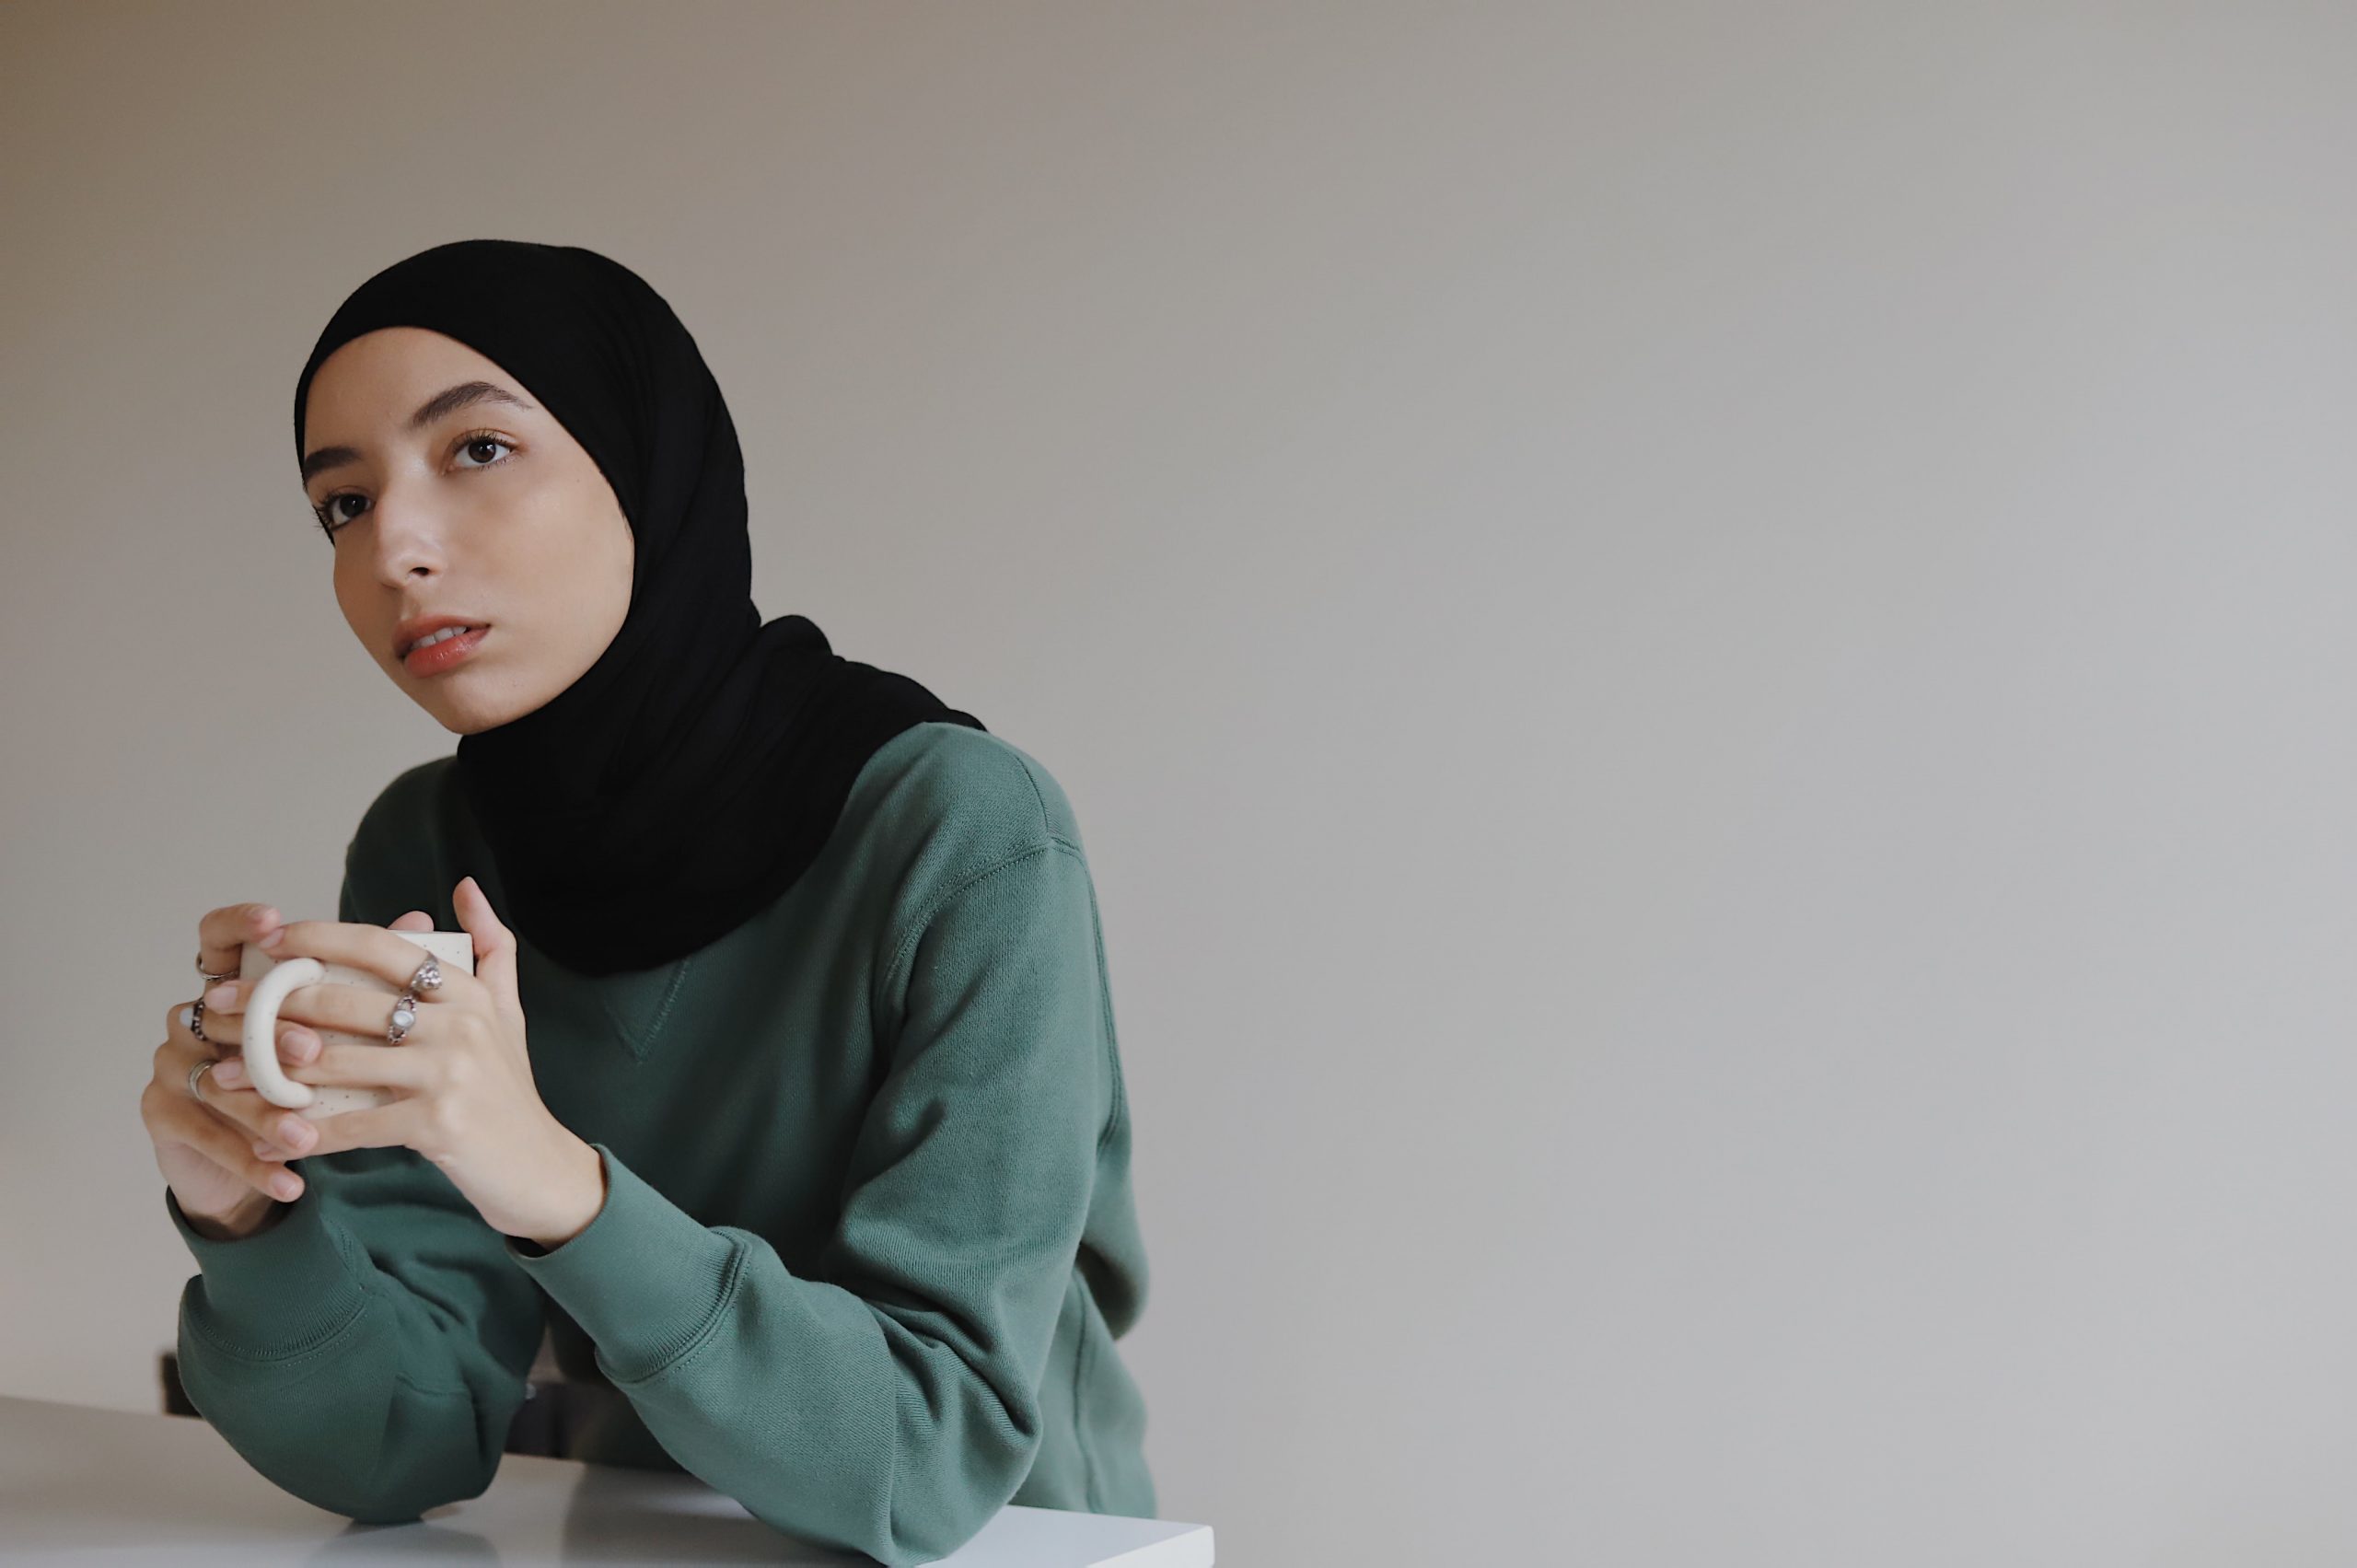 A young Muslim woman wearing a black hijab and green/blue jumper olds a mug of coffee and looks penseive.